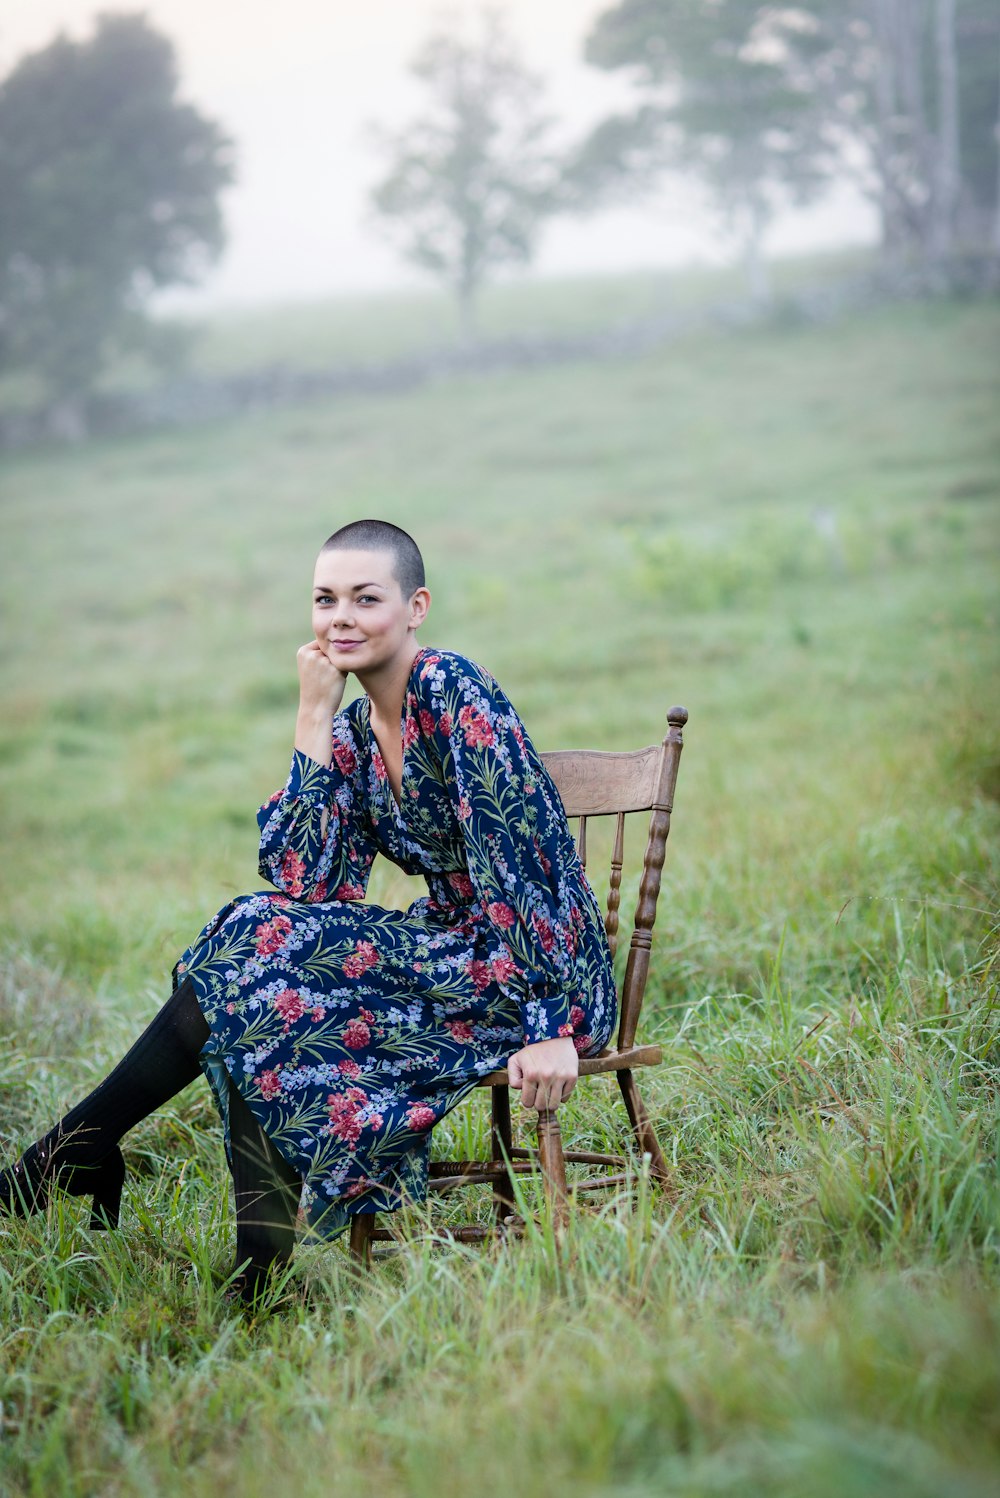 woman sitting on chair surrounded by grass field